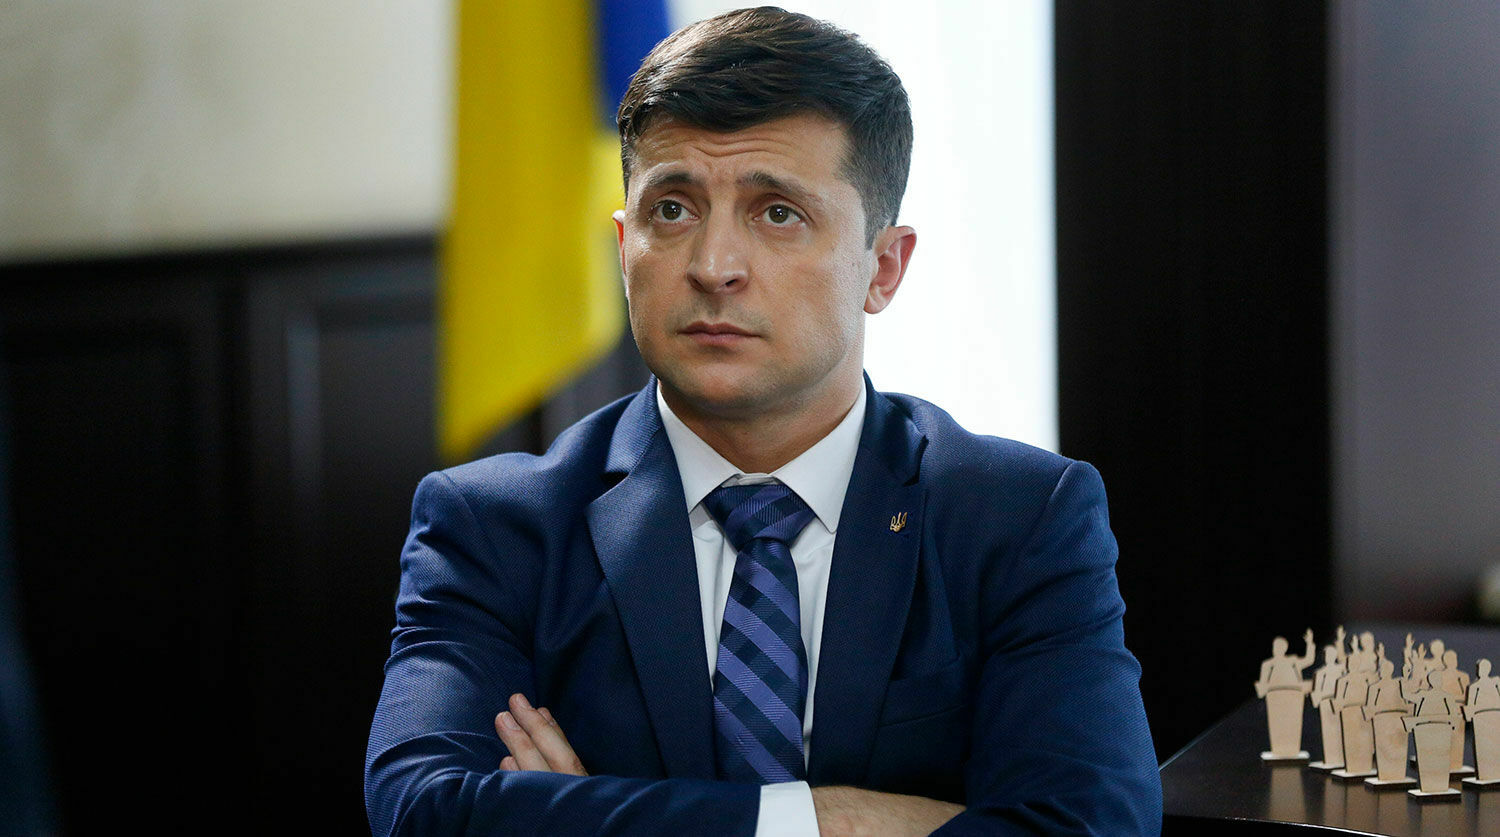 Zelensky said that he would not visit Moscow to attend the Victory Parade